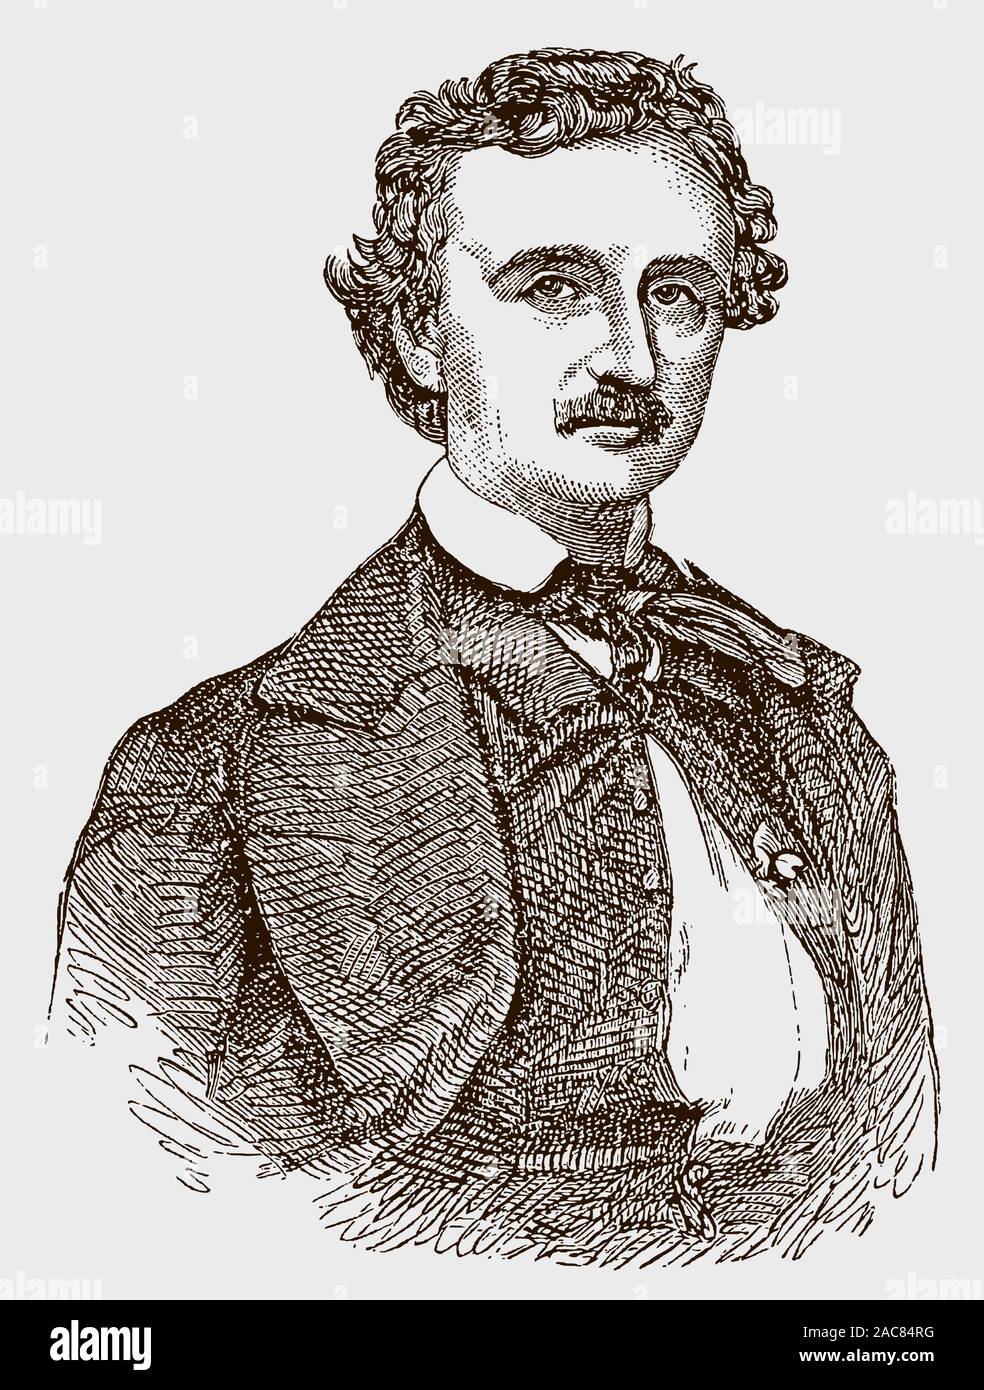 Historical portrait of Edgar Allan Poe, the american writer. Illustration after an engraving or lithography from the 19th century Stock Vector